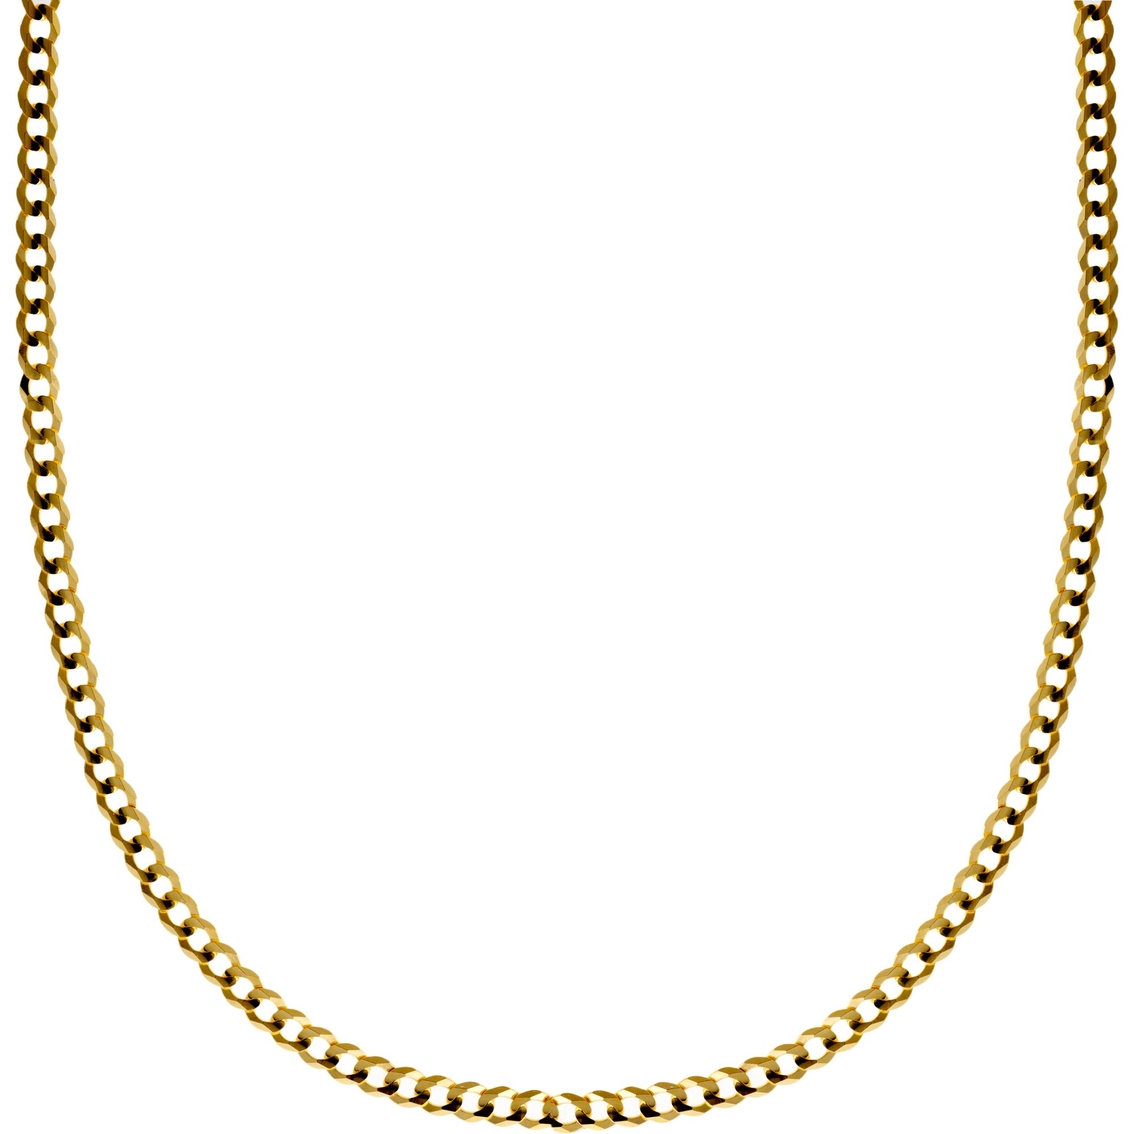 14K 3.15mm Solid Curb Chain Necklace